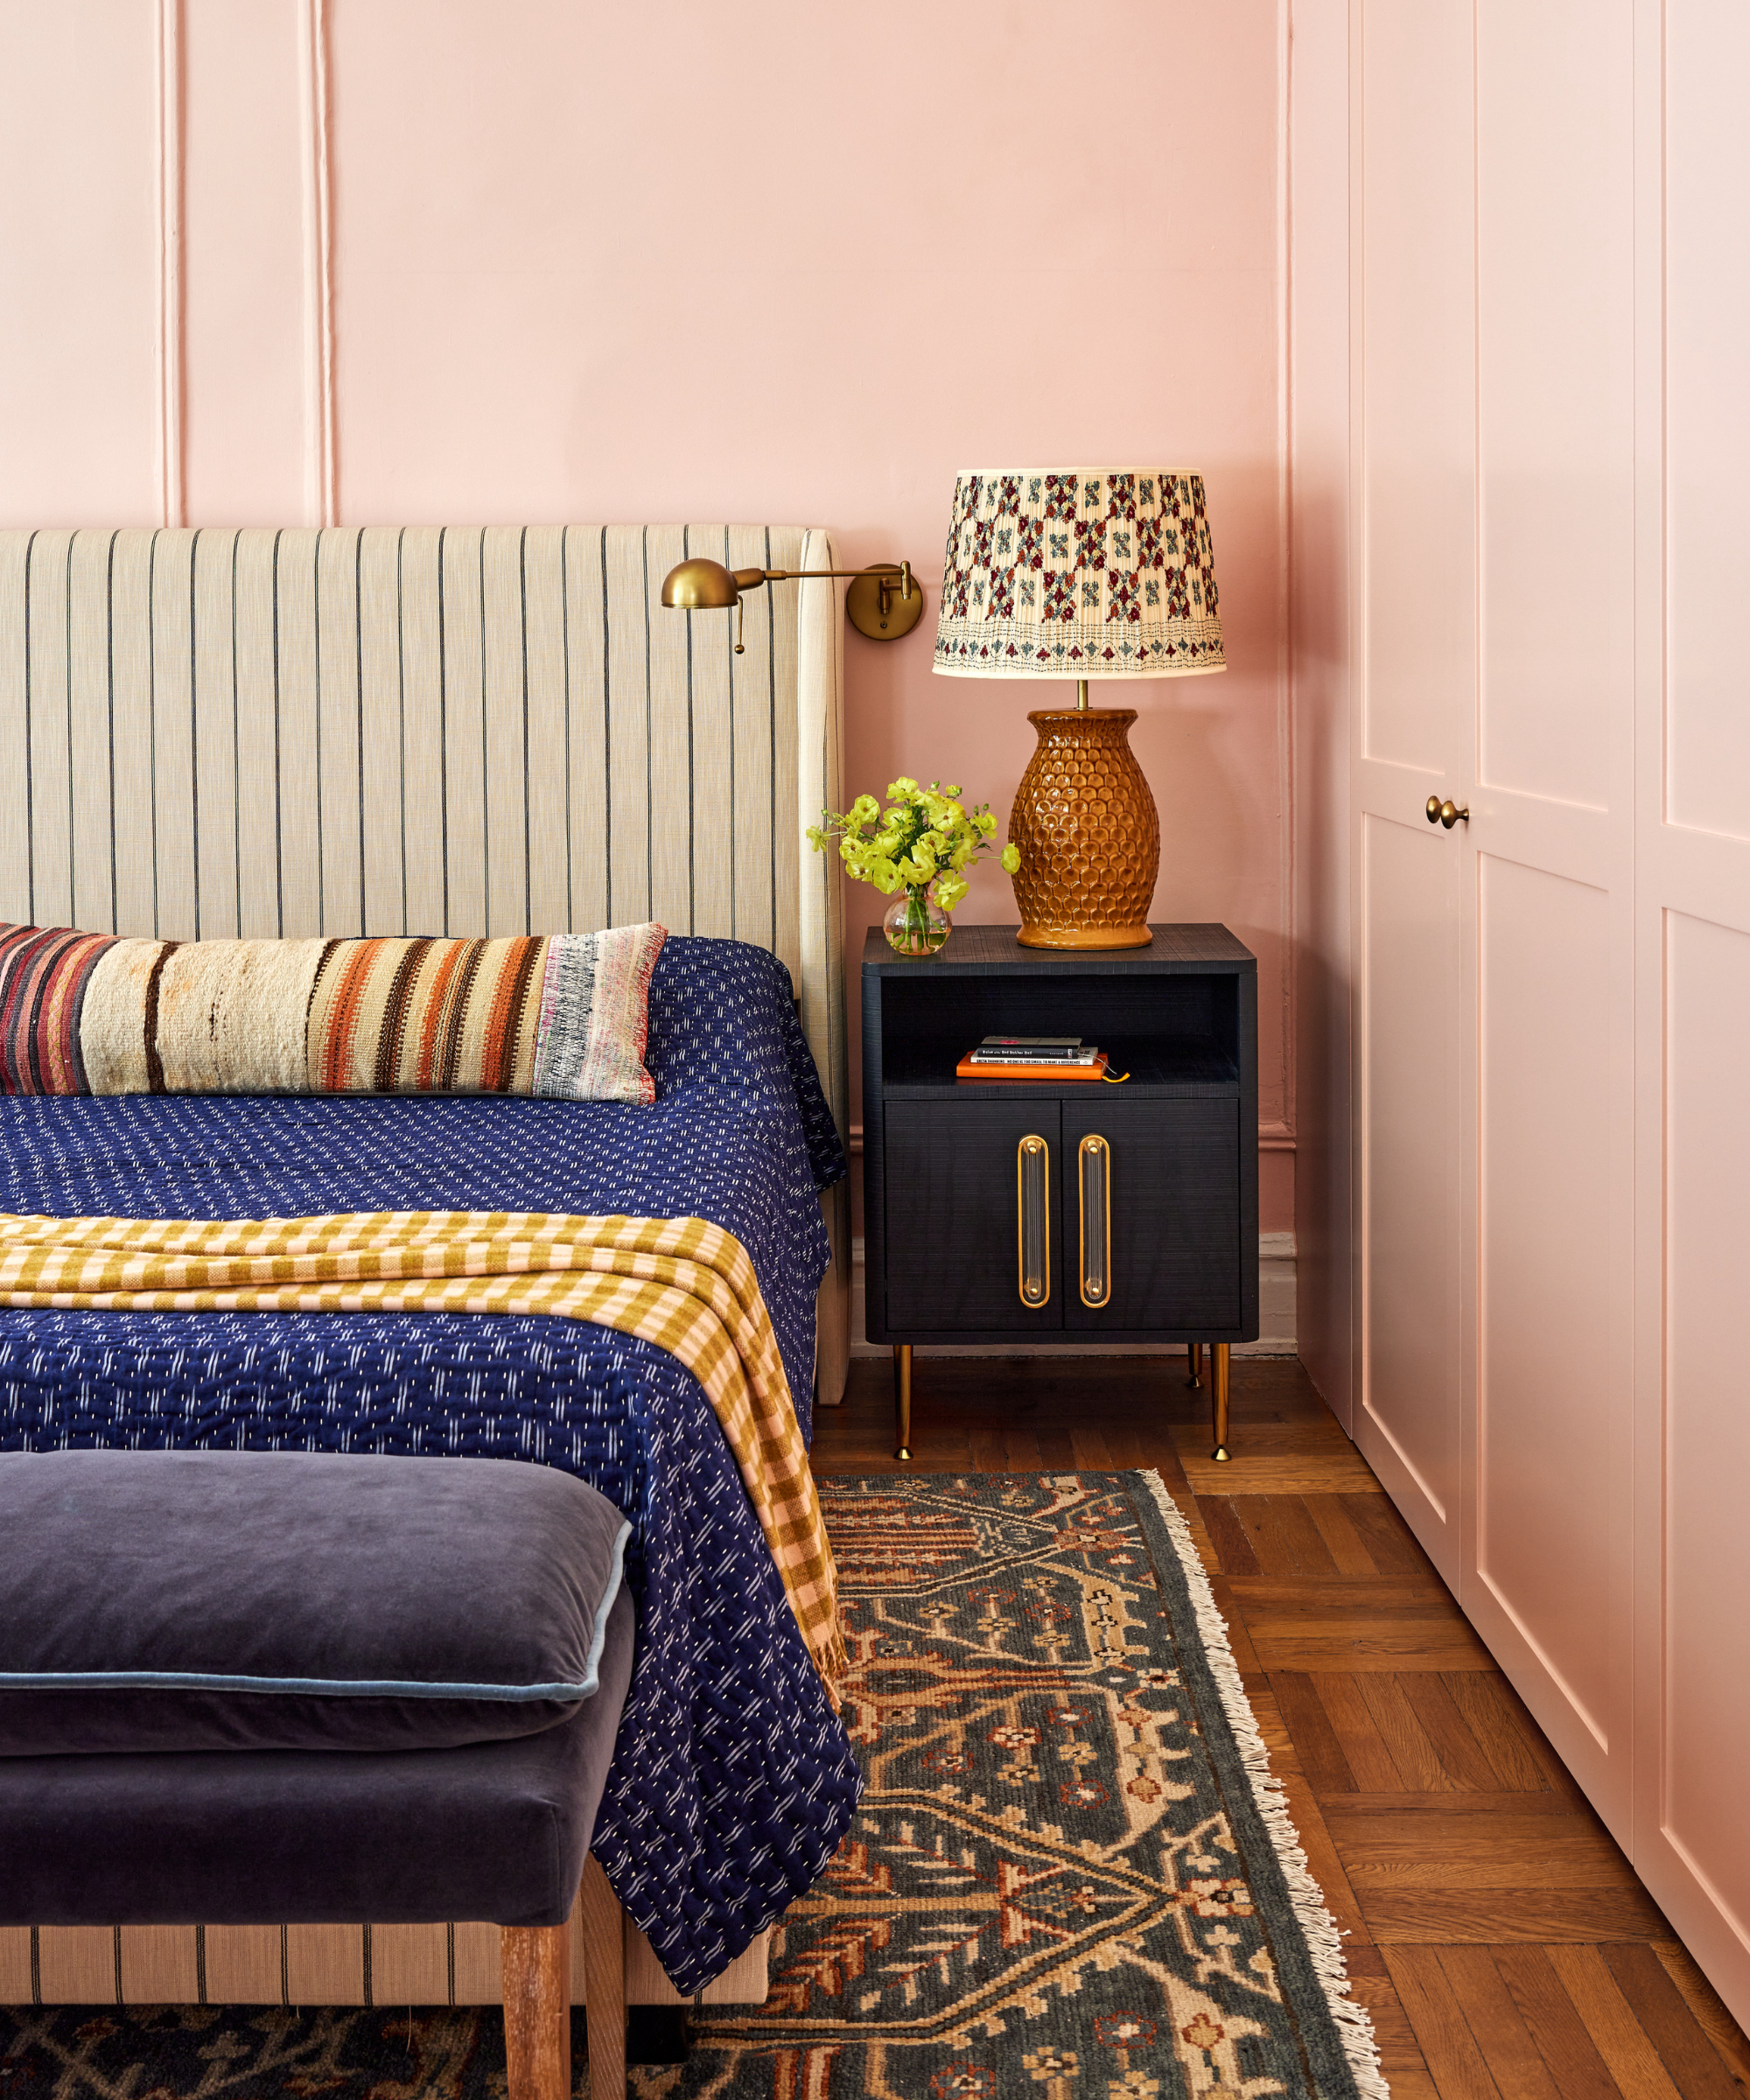 colors that go with light pink, bedroom with light pink walls, stripe upholstered bed, indigo blue blanket, navy nightstand, navy ottoman, vintage rug, hardwood floor, wall light, patterned shade on table lamp, stripe bed pillow, turmeric checked blanket, wardrobes